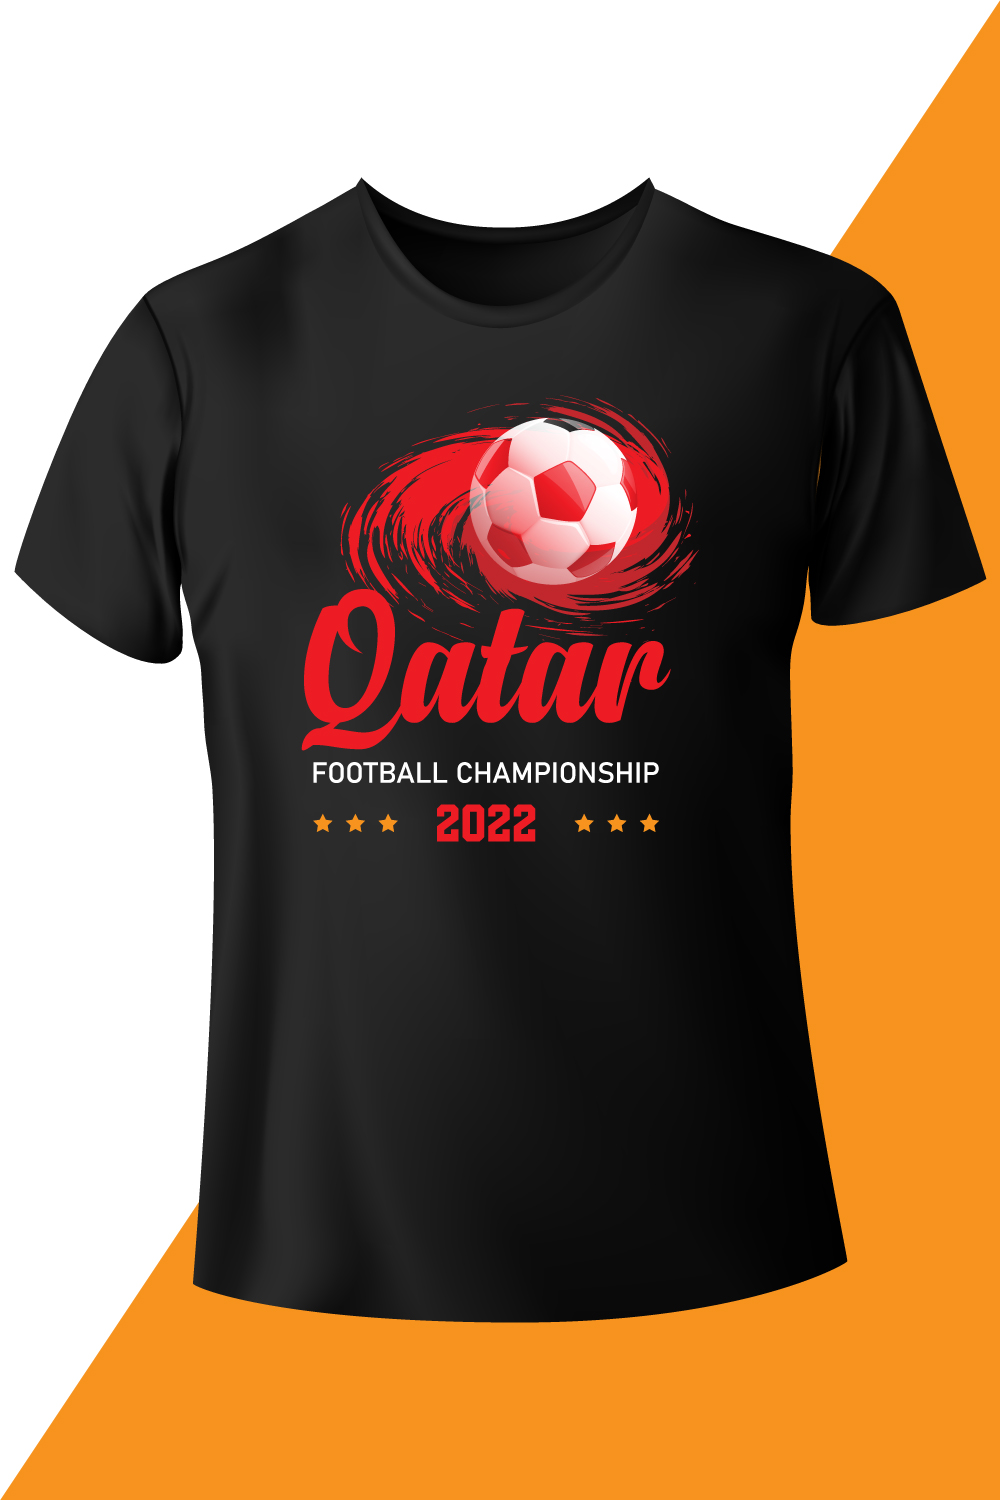 Image of a black T-shirt with a charming print on the theme of the World Cup in Qatar.